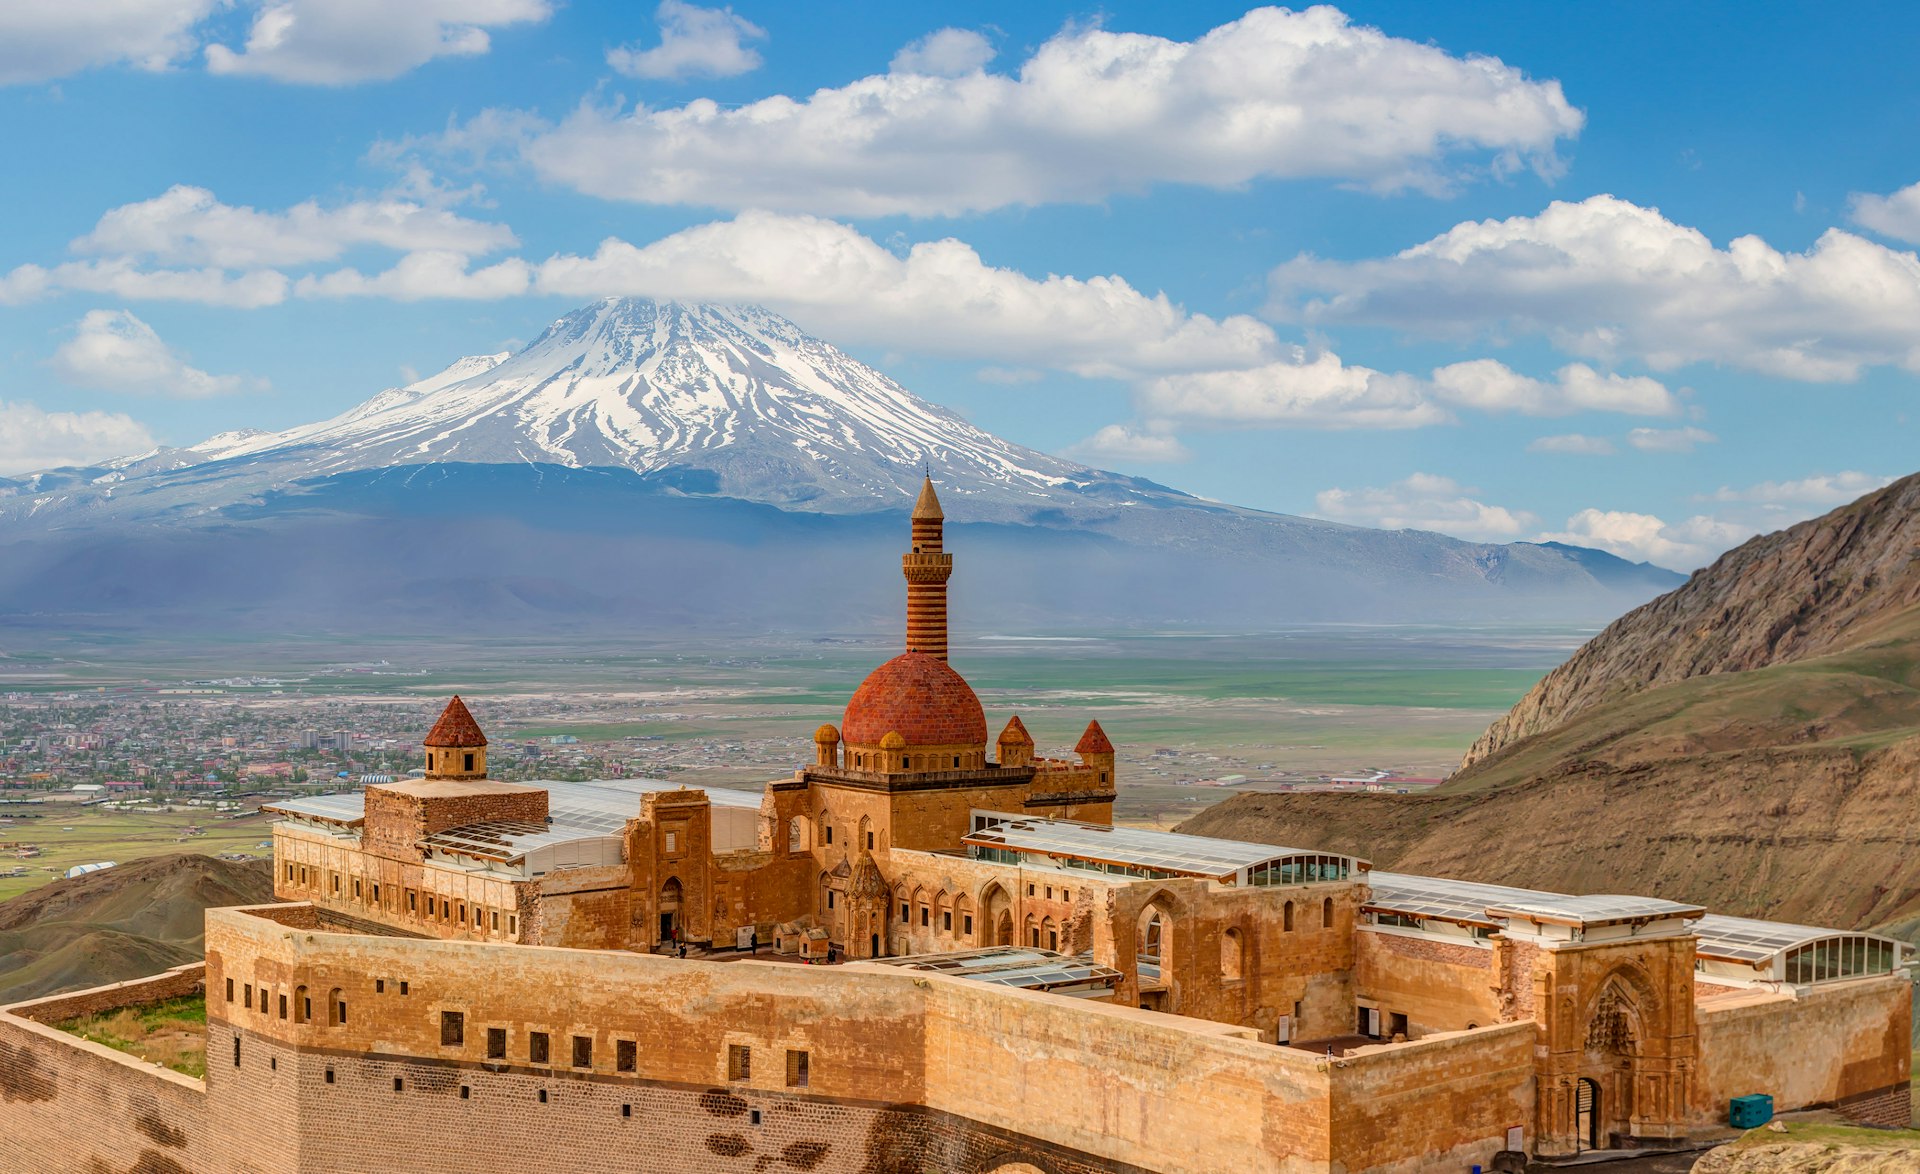 A red-stone palace with a central domed tower. A snow-capped mountain rises in the distance